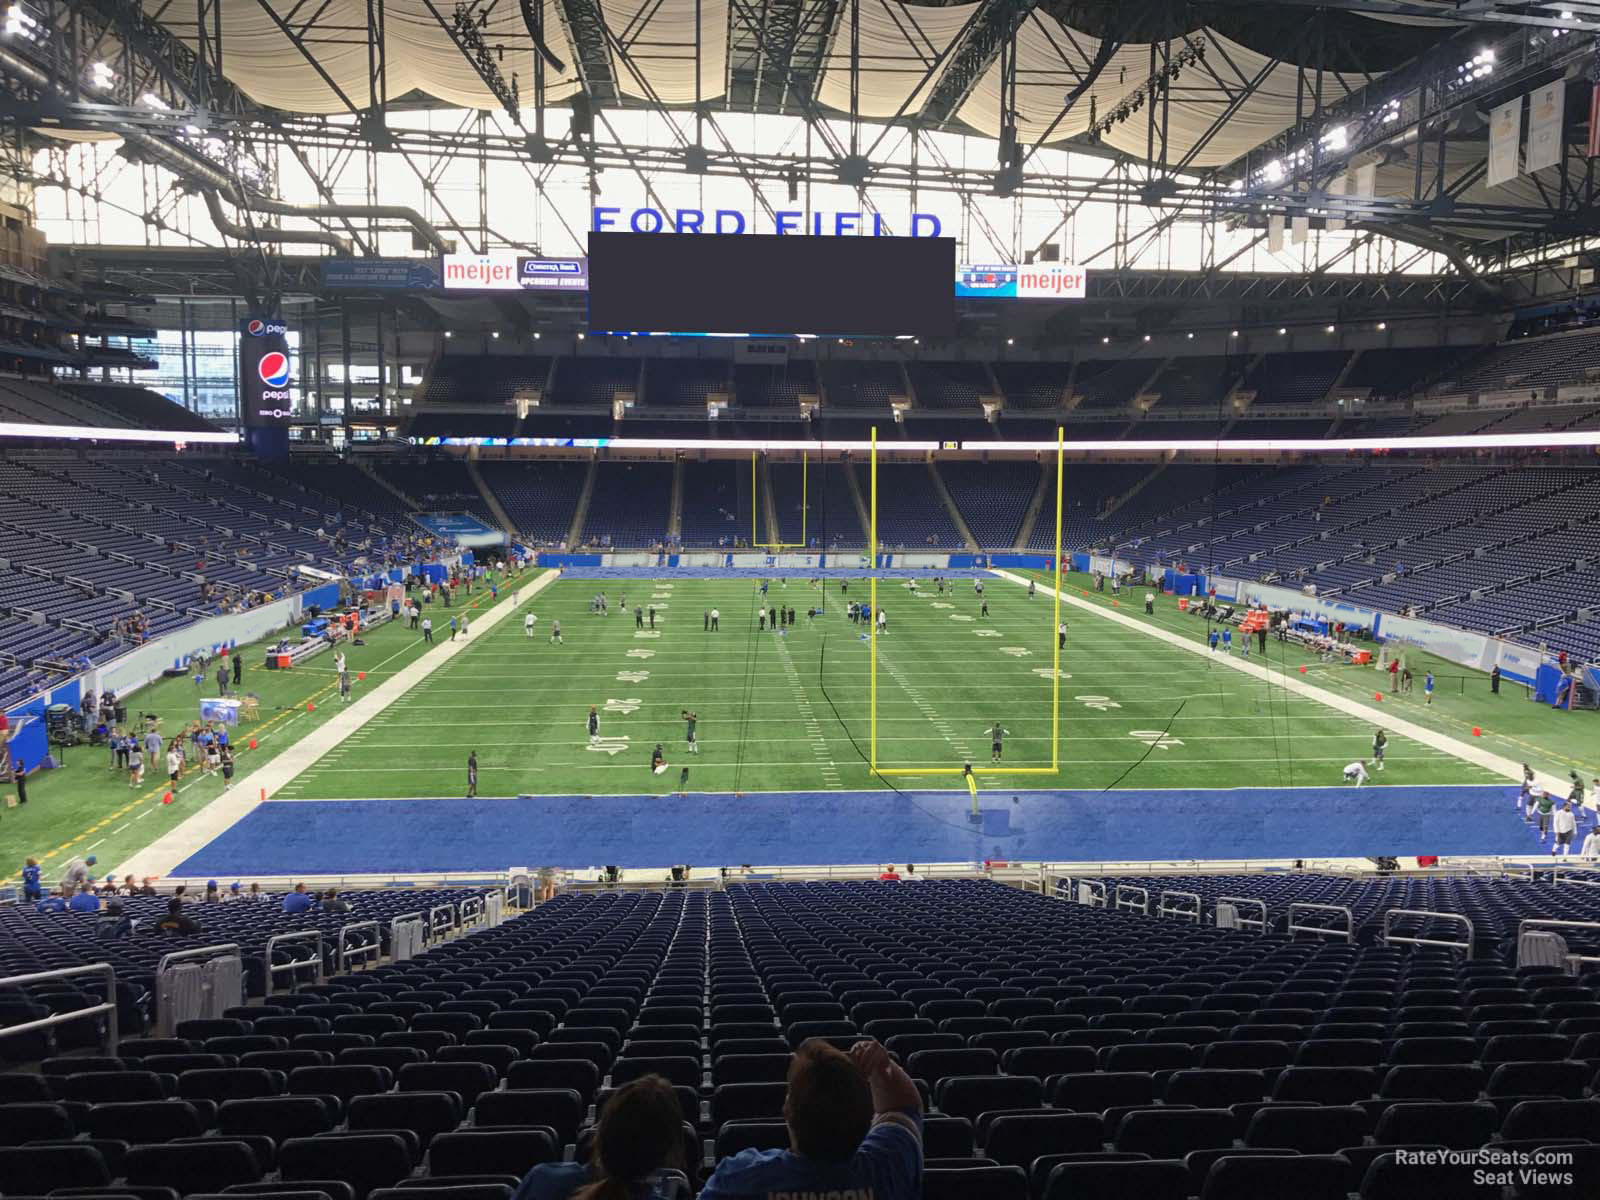 section 116, row 33 seat view  for football - ford field